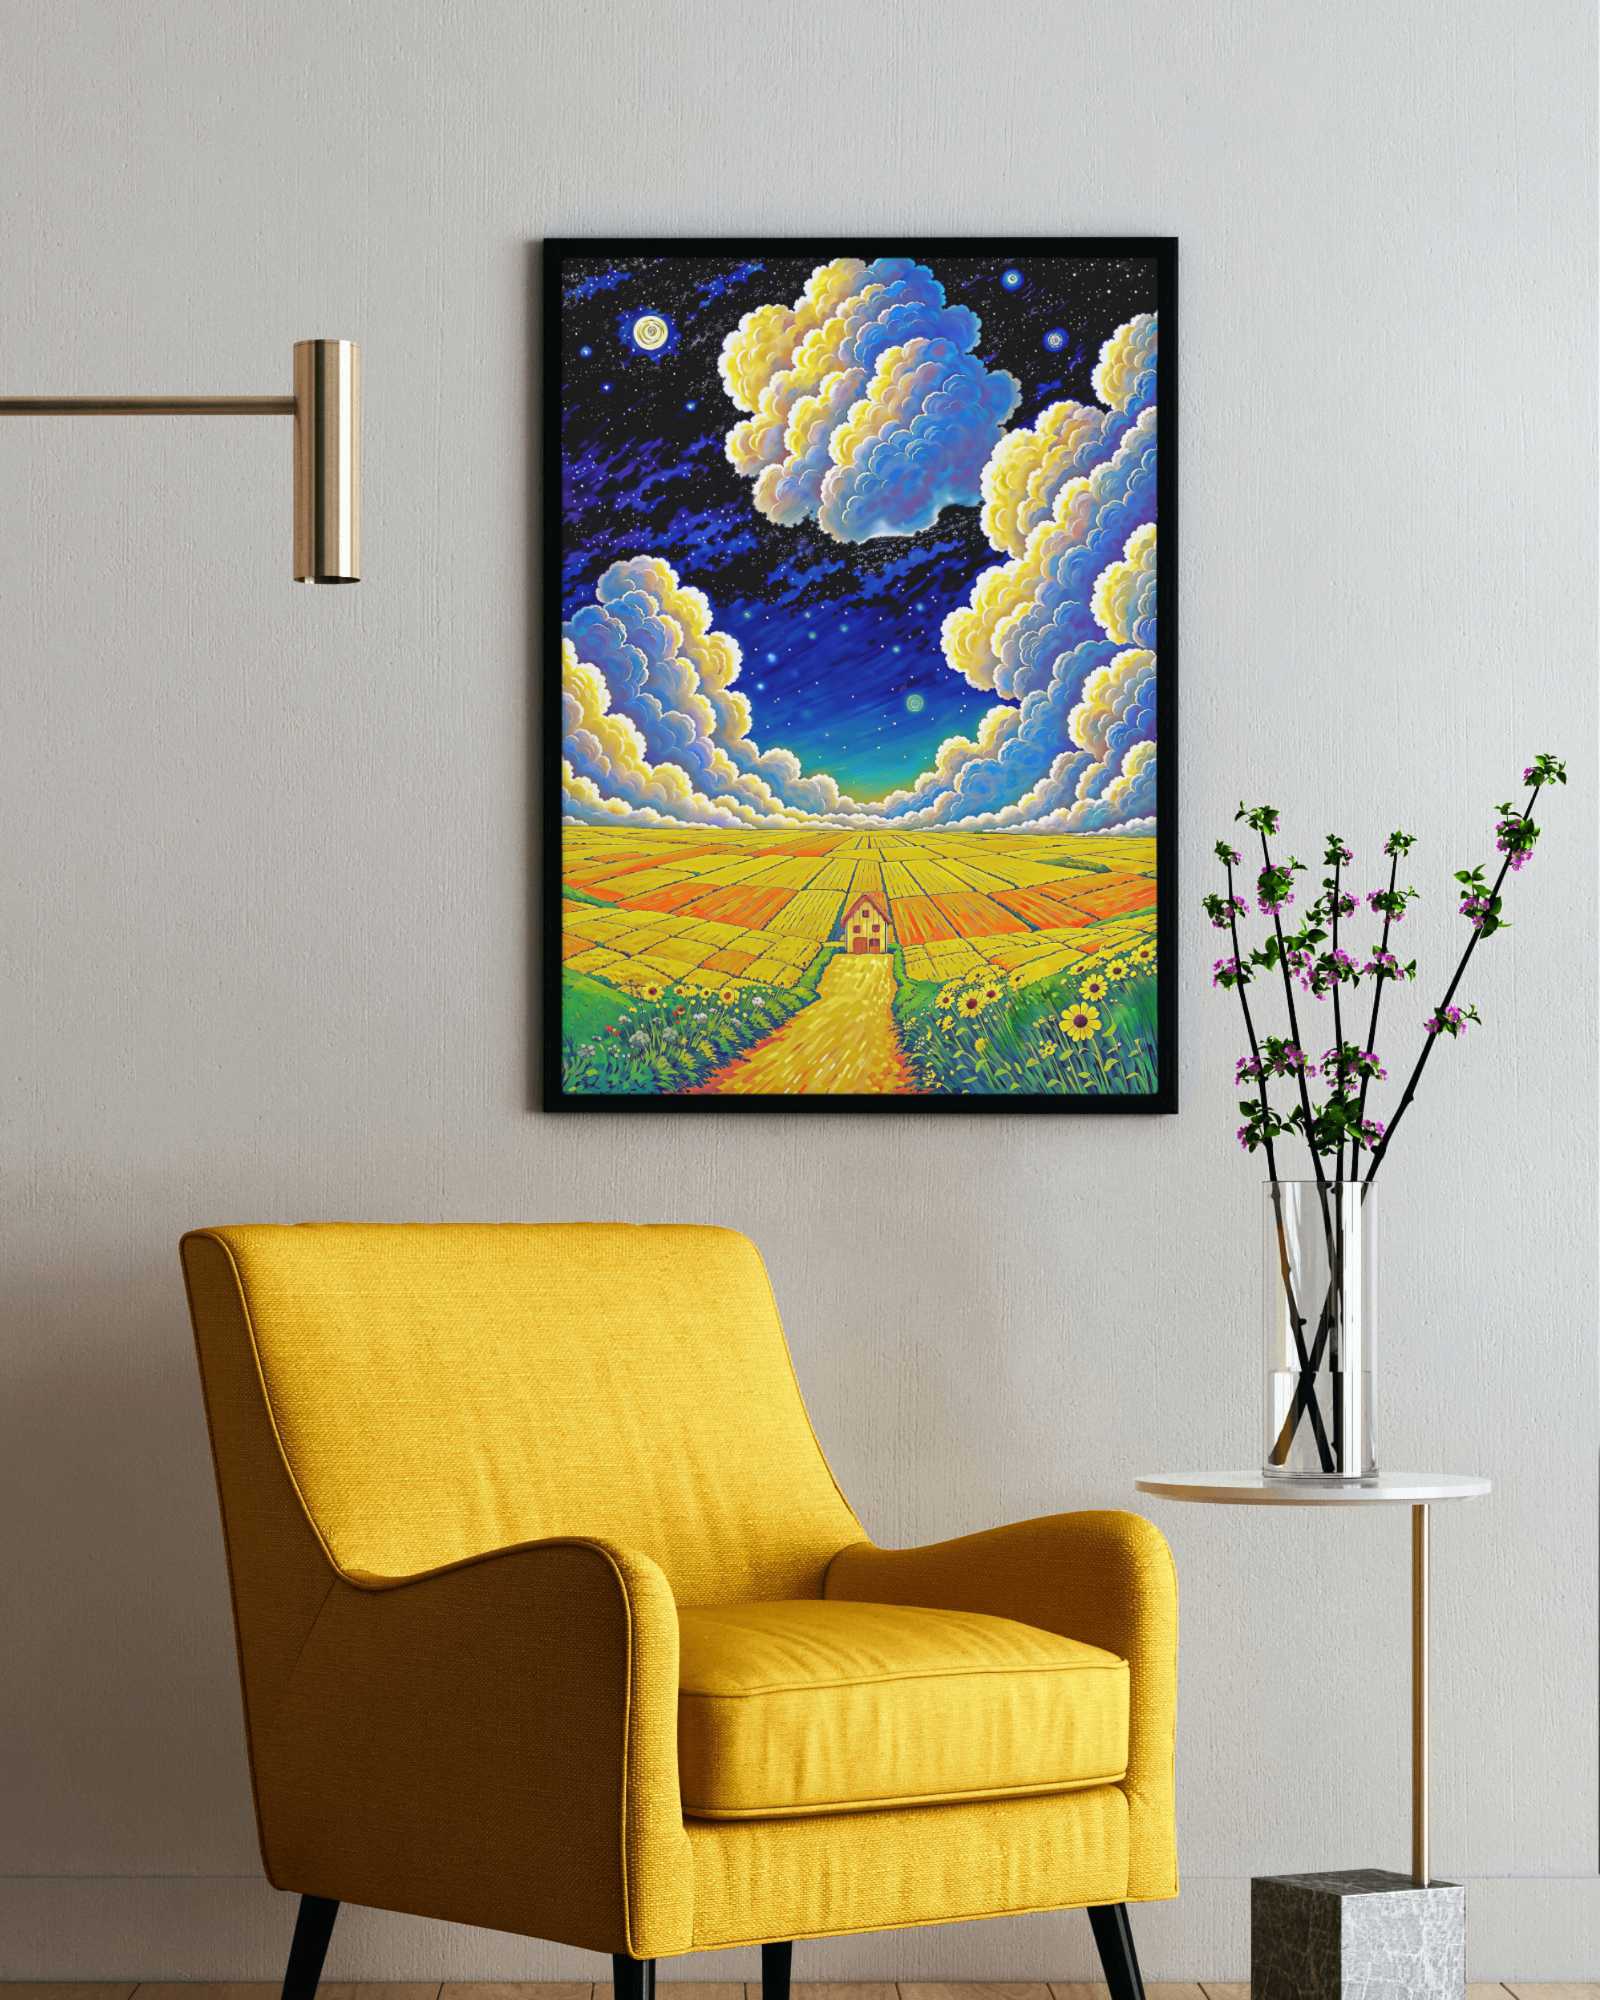 In the middle of dreamland - Poster - Ever colorful